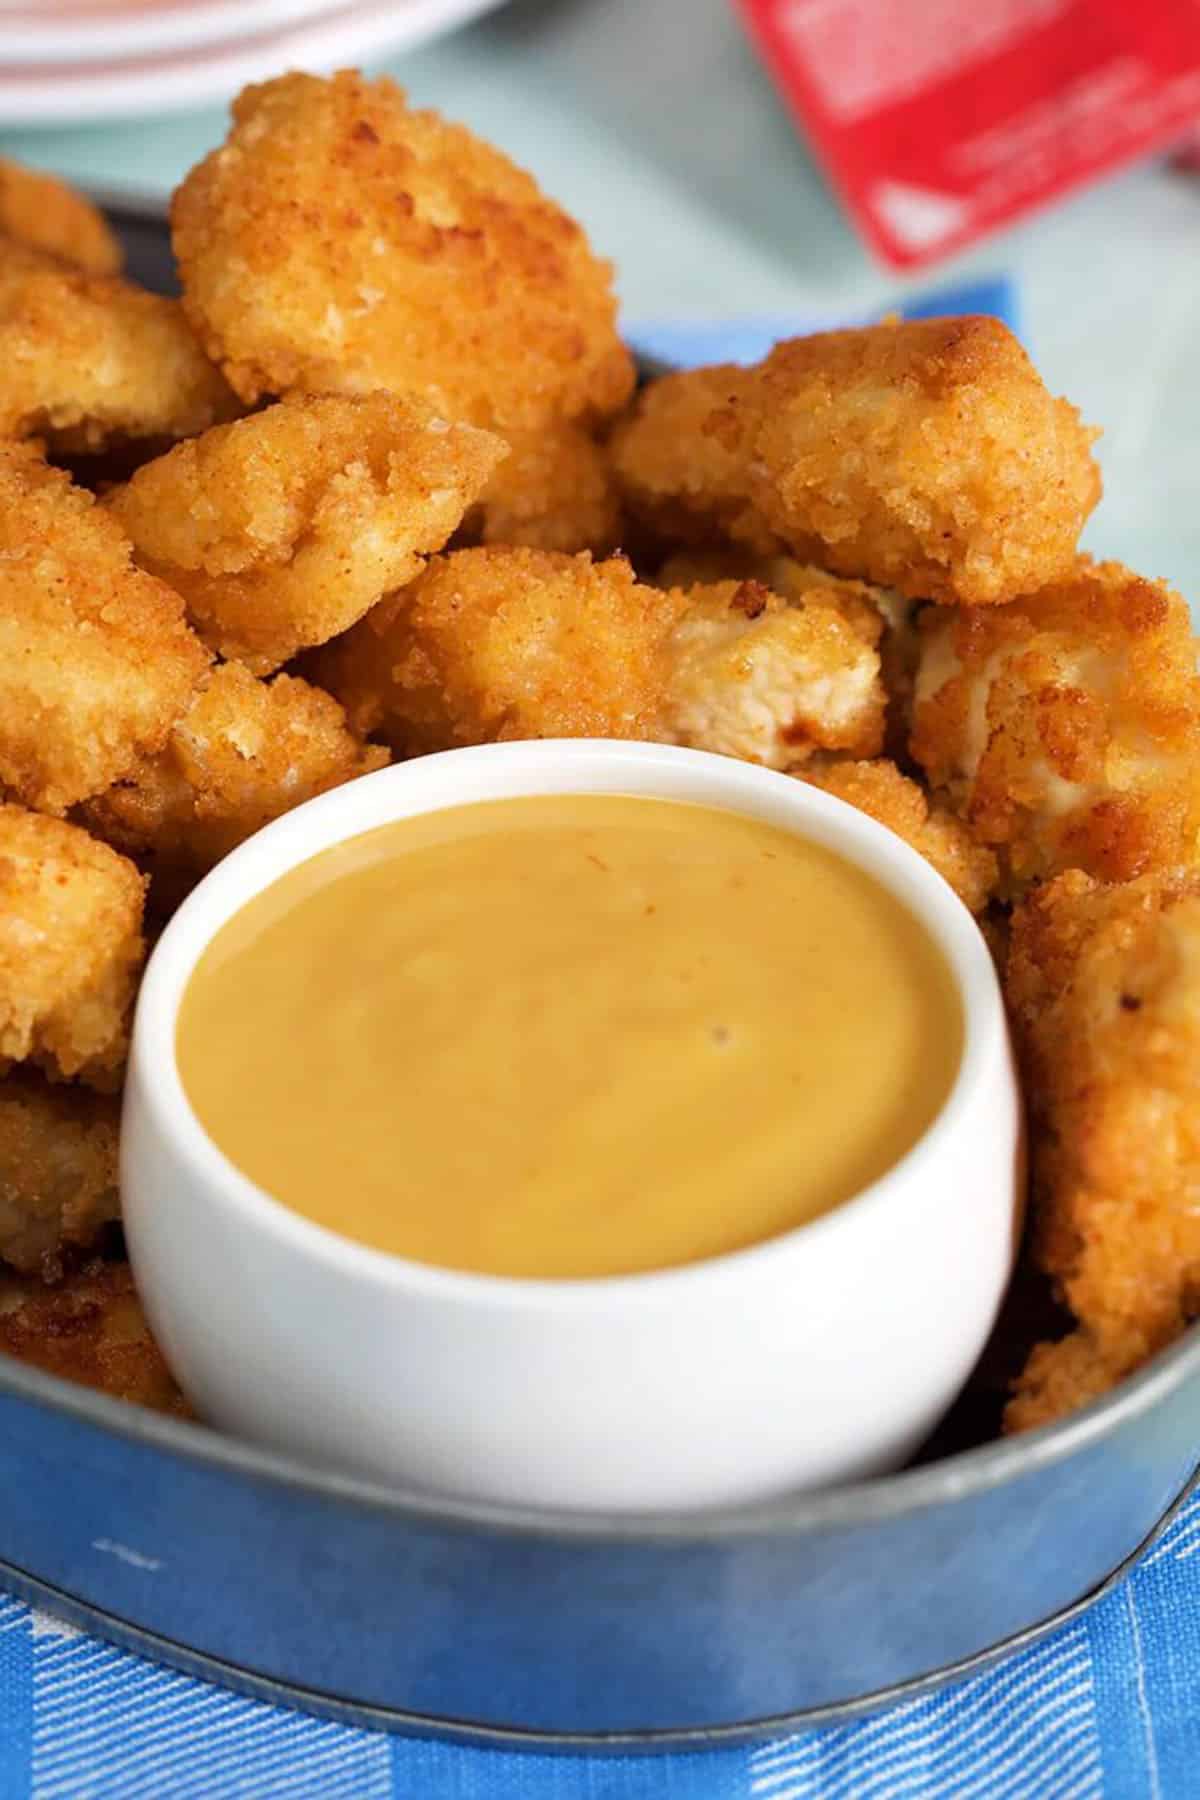 Chick Fil A Sauce in a white round dish inside a steel tray with chicken nuggets around the dish.